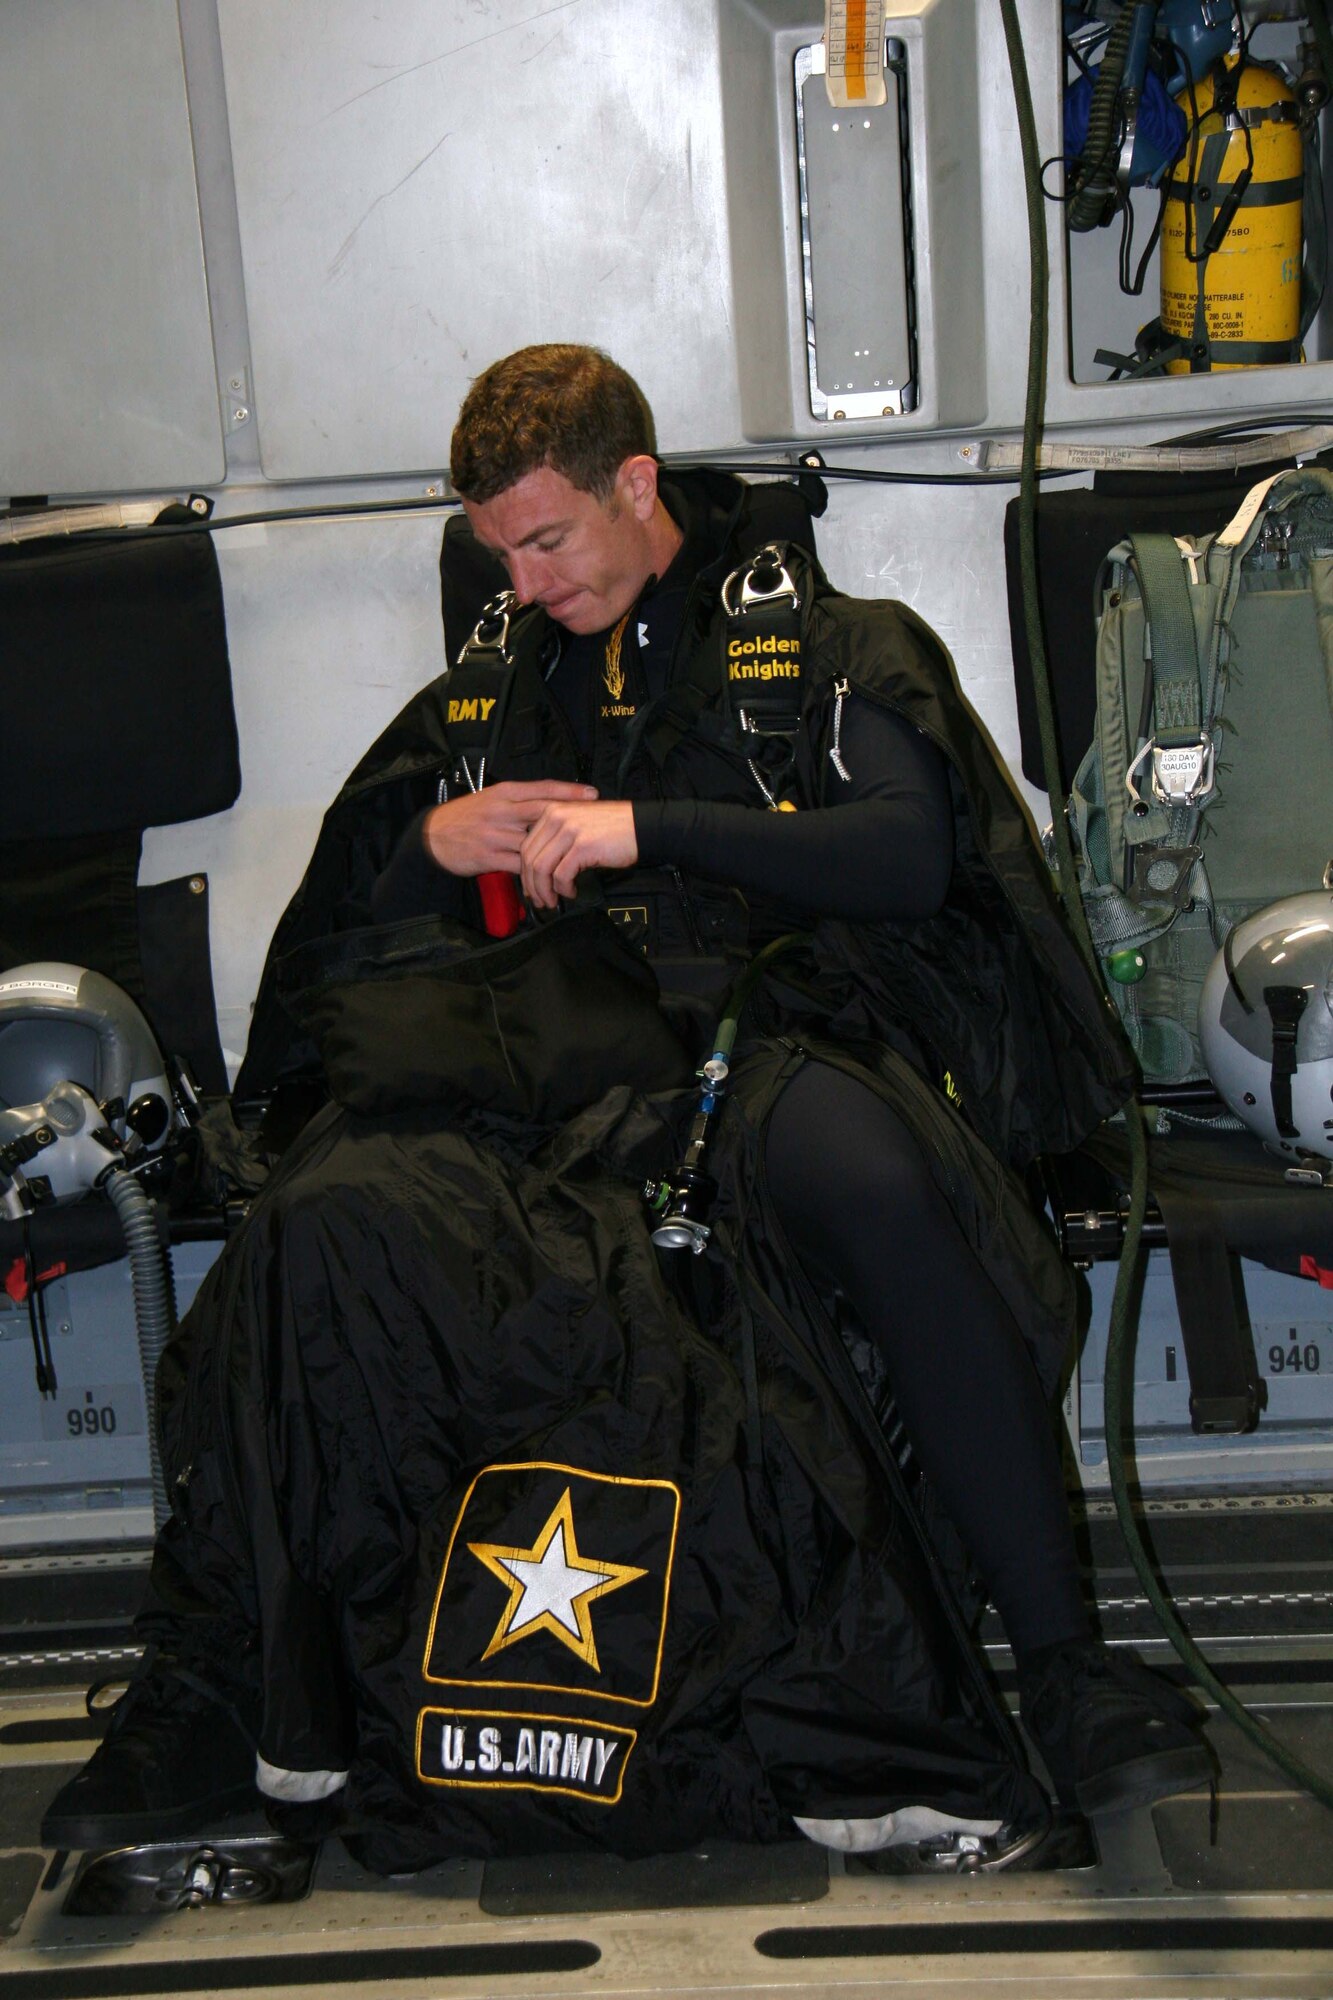 ALTUS AIR FORCE BASE, Okla. -- U.S. Army Staff Sgt. Ben Borger of the U.S. Army parachute team known as the Golden Knights checks over his wing-suit before attempting to set a new world wing-suit distance record over Altus Air Force Base April 14. With the assistance of the Altus C-17 Globemaster III crew, Sergeant Borger jumped out of the plane at an altitude of 32,000 feet. He broke the record by a mile and a half and is currently awaiting confirmation of the new set record from the Guinness Book of World Records. (U.S. Army Courtesy Photo/Released Golden Knights)